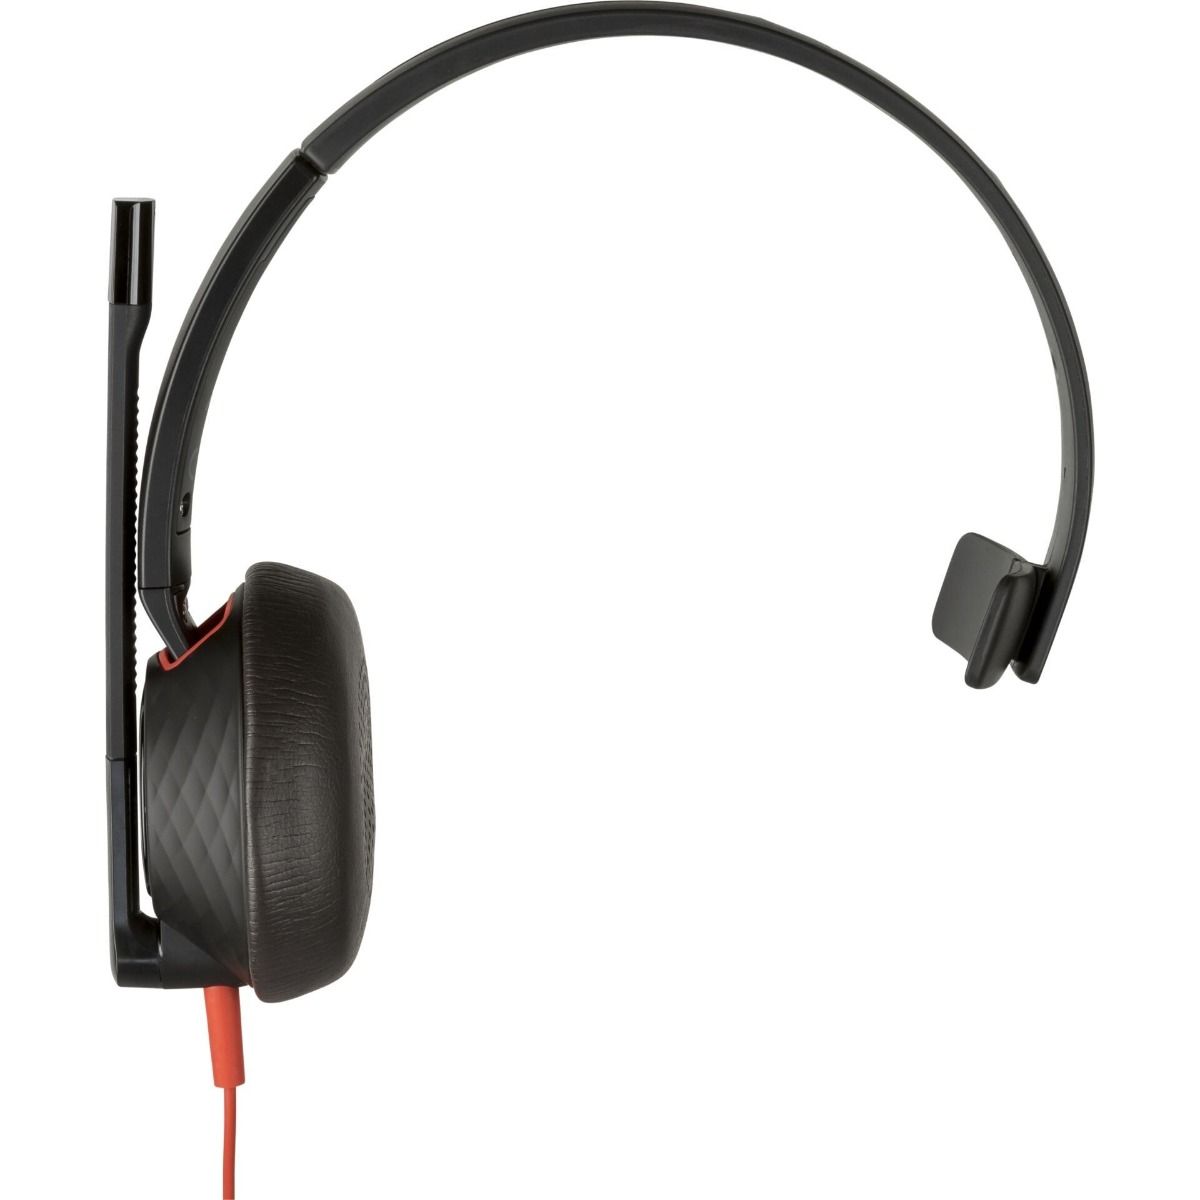 POLY Blackwire 5210 Wired Headset USB Type-A Black